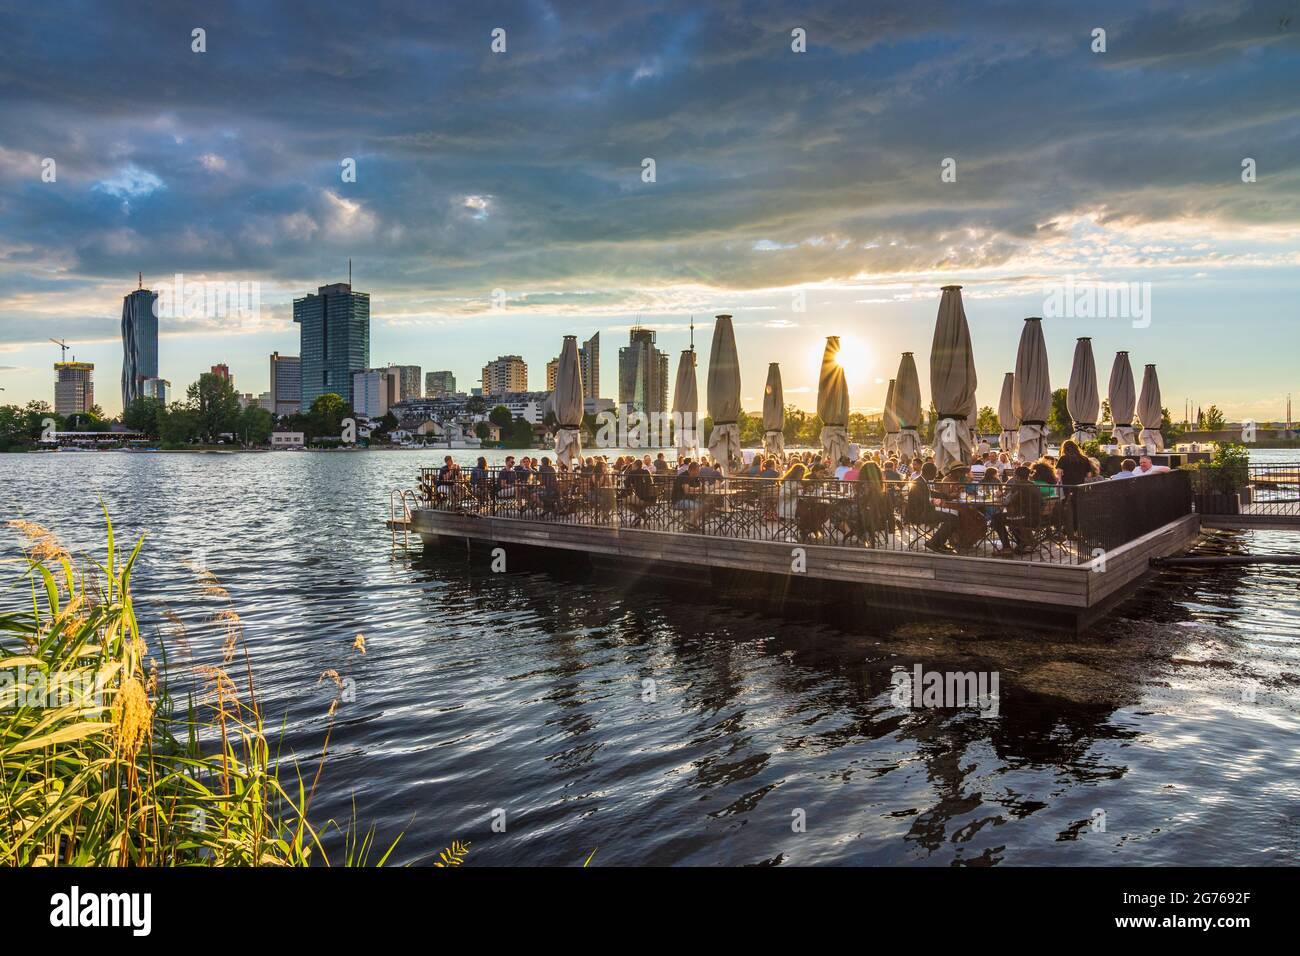 Wien, Vienna: late sun at river Alte Donau (Old Danube), floating platform  of restaurant Strandcafe, boats, tower Donauturm, highrises of Donaucity, D  Stock Photo - Alamy